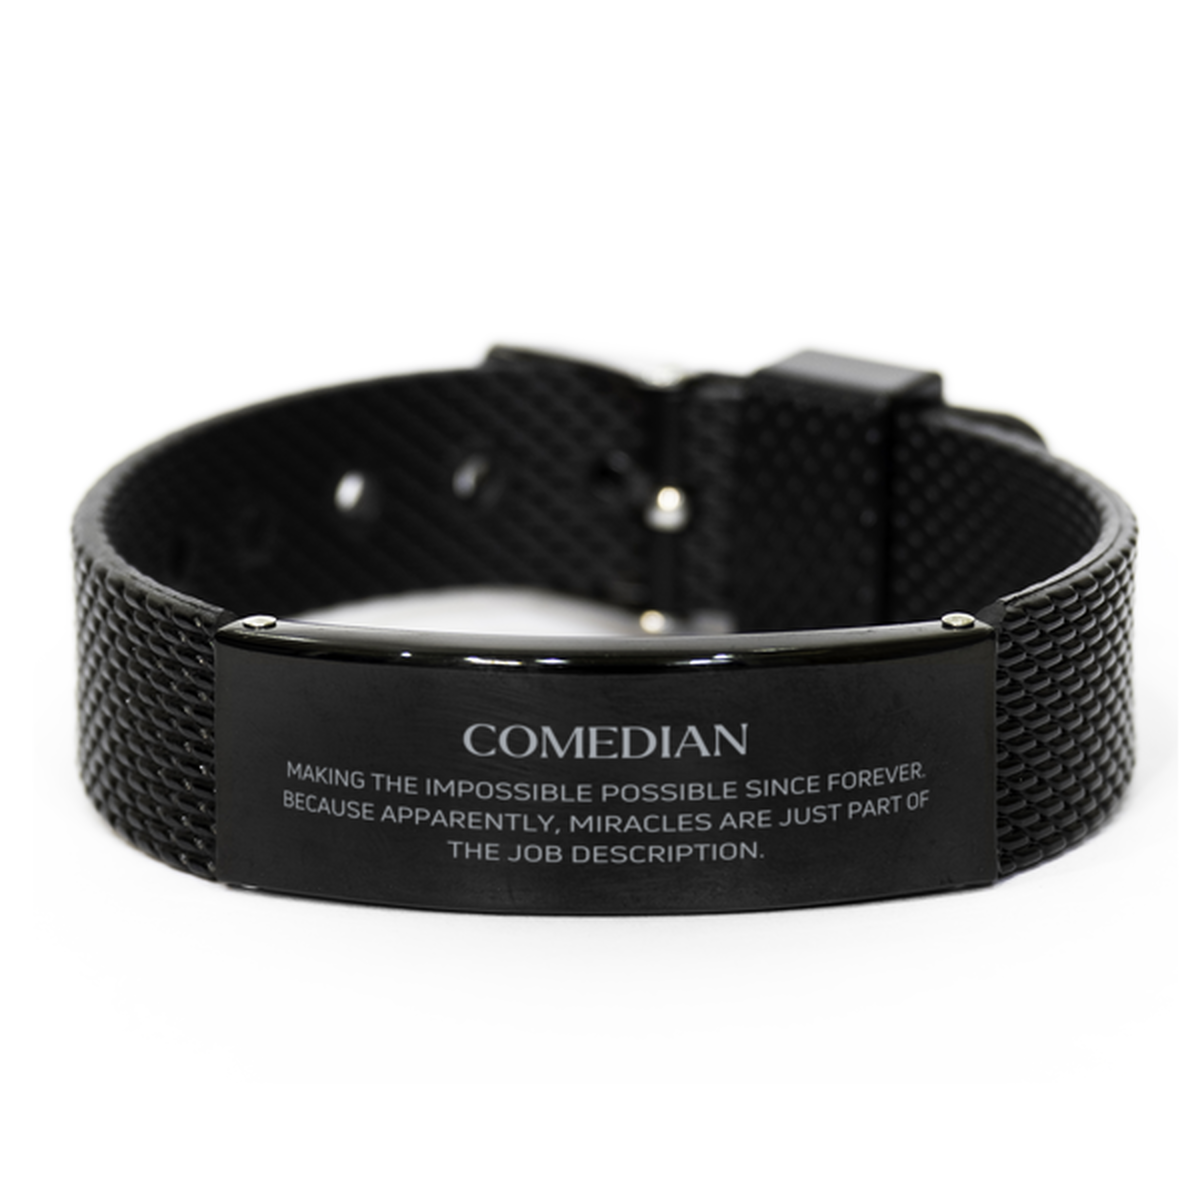 Funny Comedian Gifts, Miracles are just part of the job description, Inspirational Birthday Black Shark Mesh Bracelet For Comedian, Men, Women, Coworkers, Friends, Boss